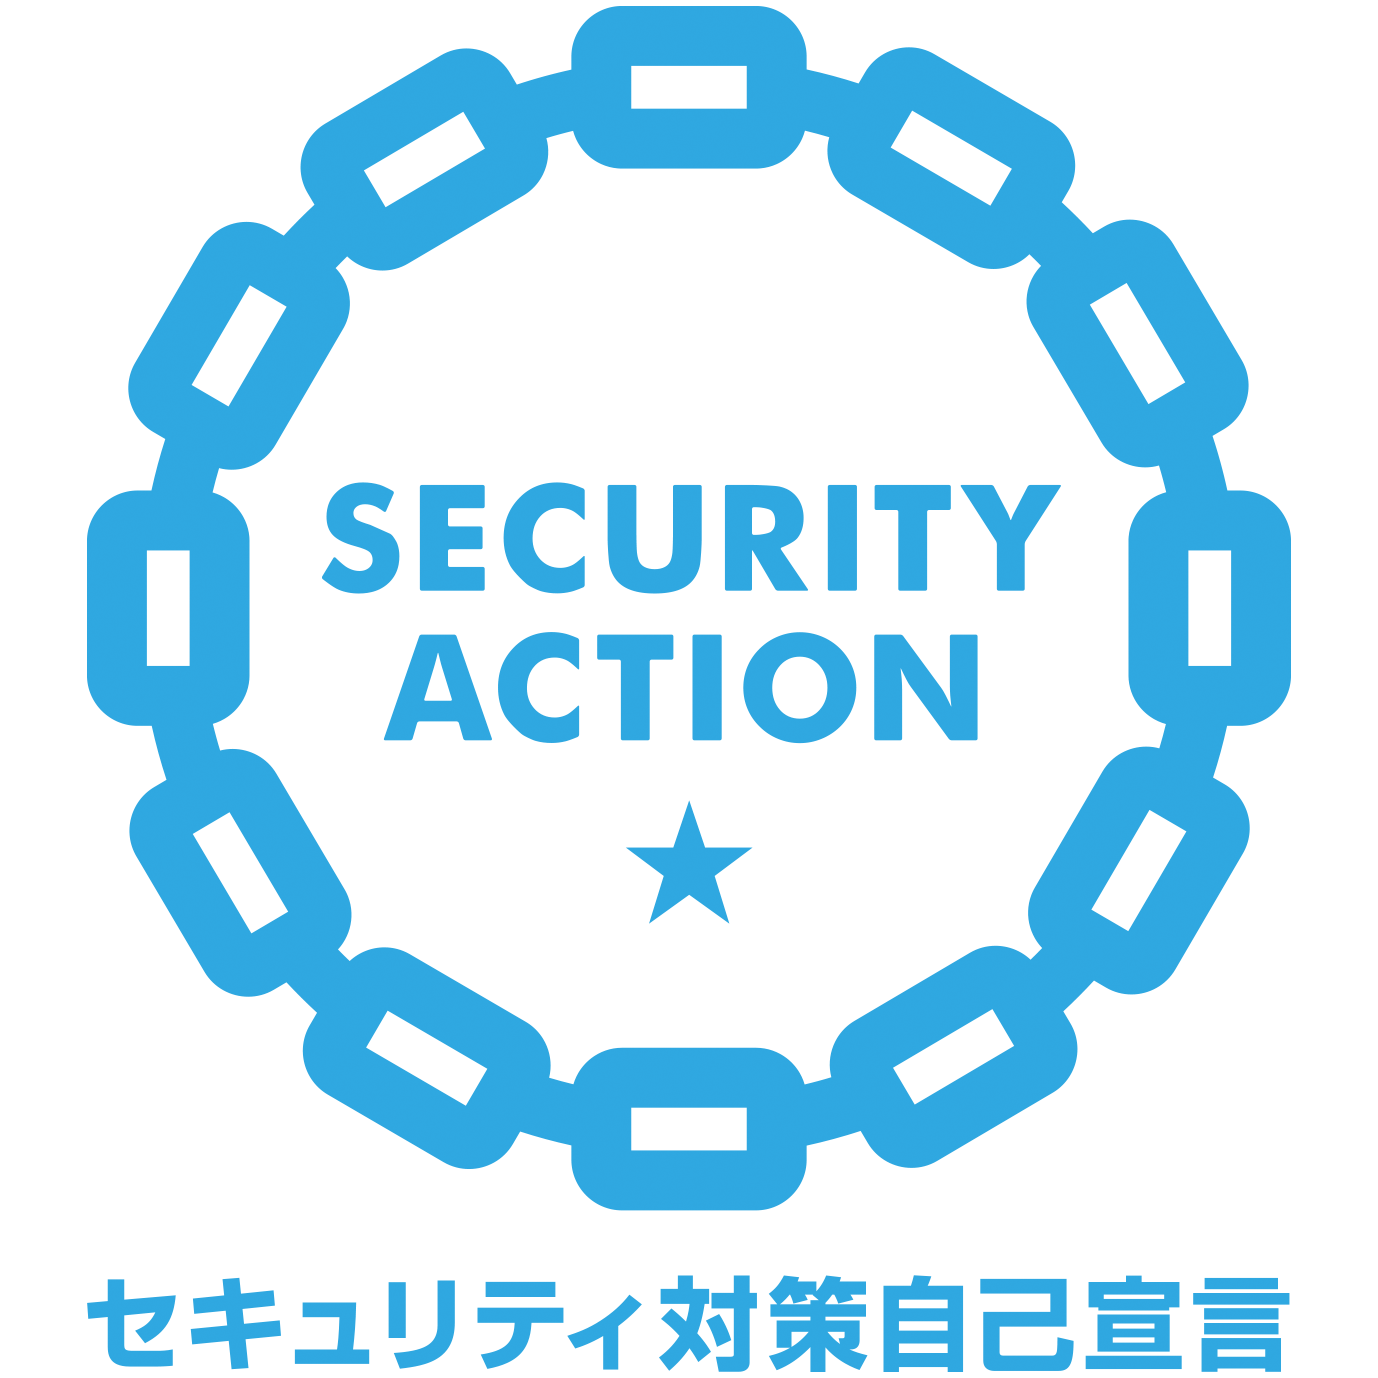 「SECURITY ACTION」の「一つ星」を宣言しました。